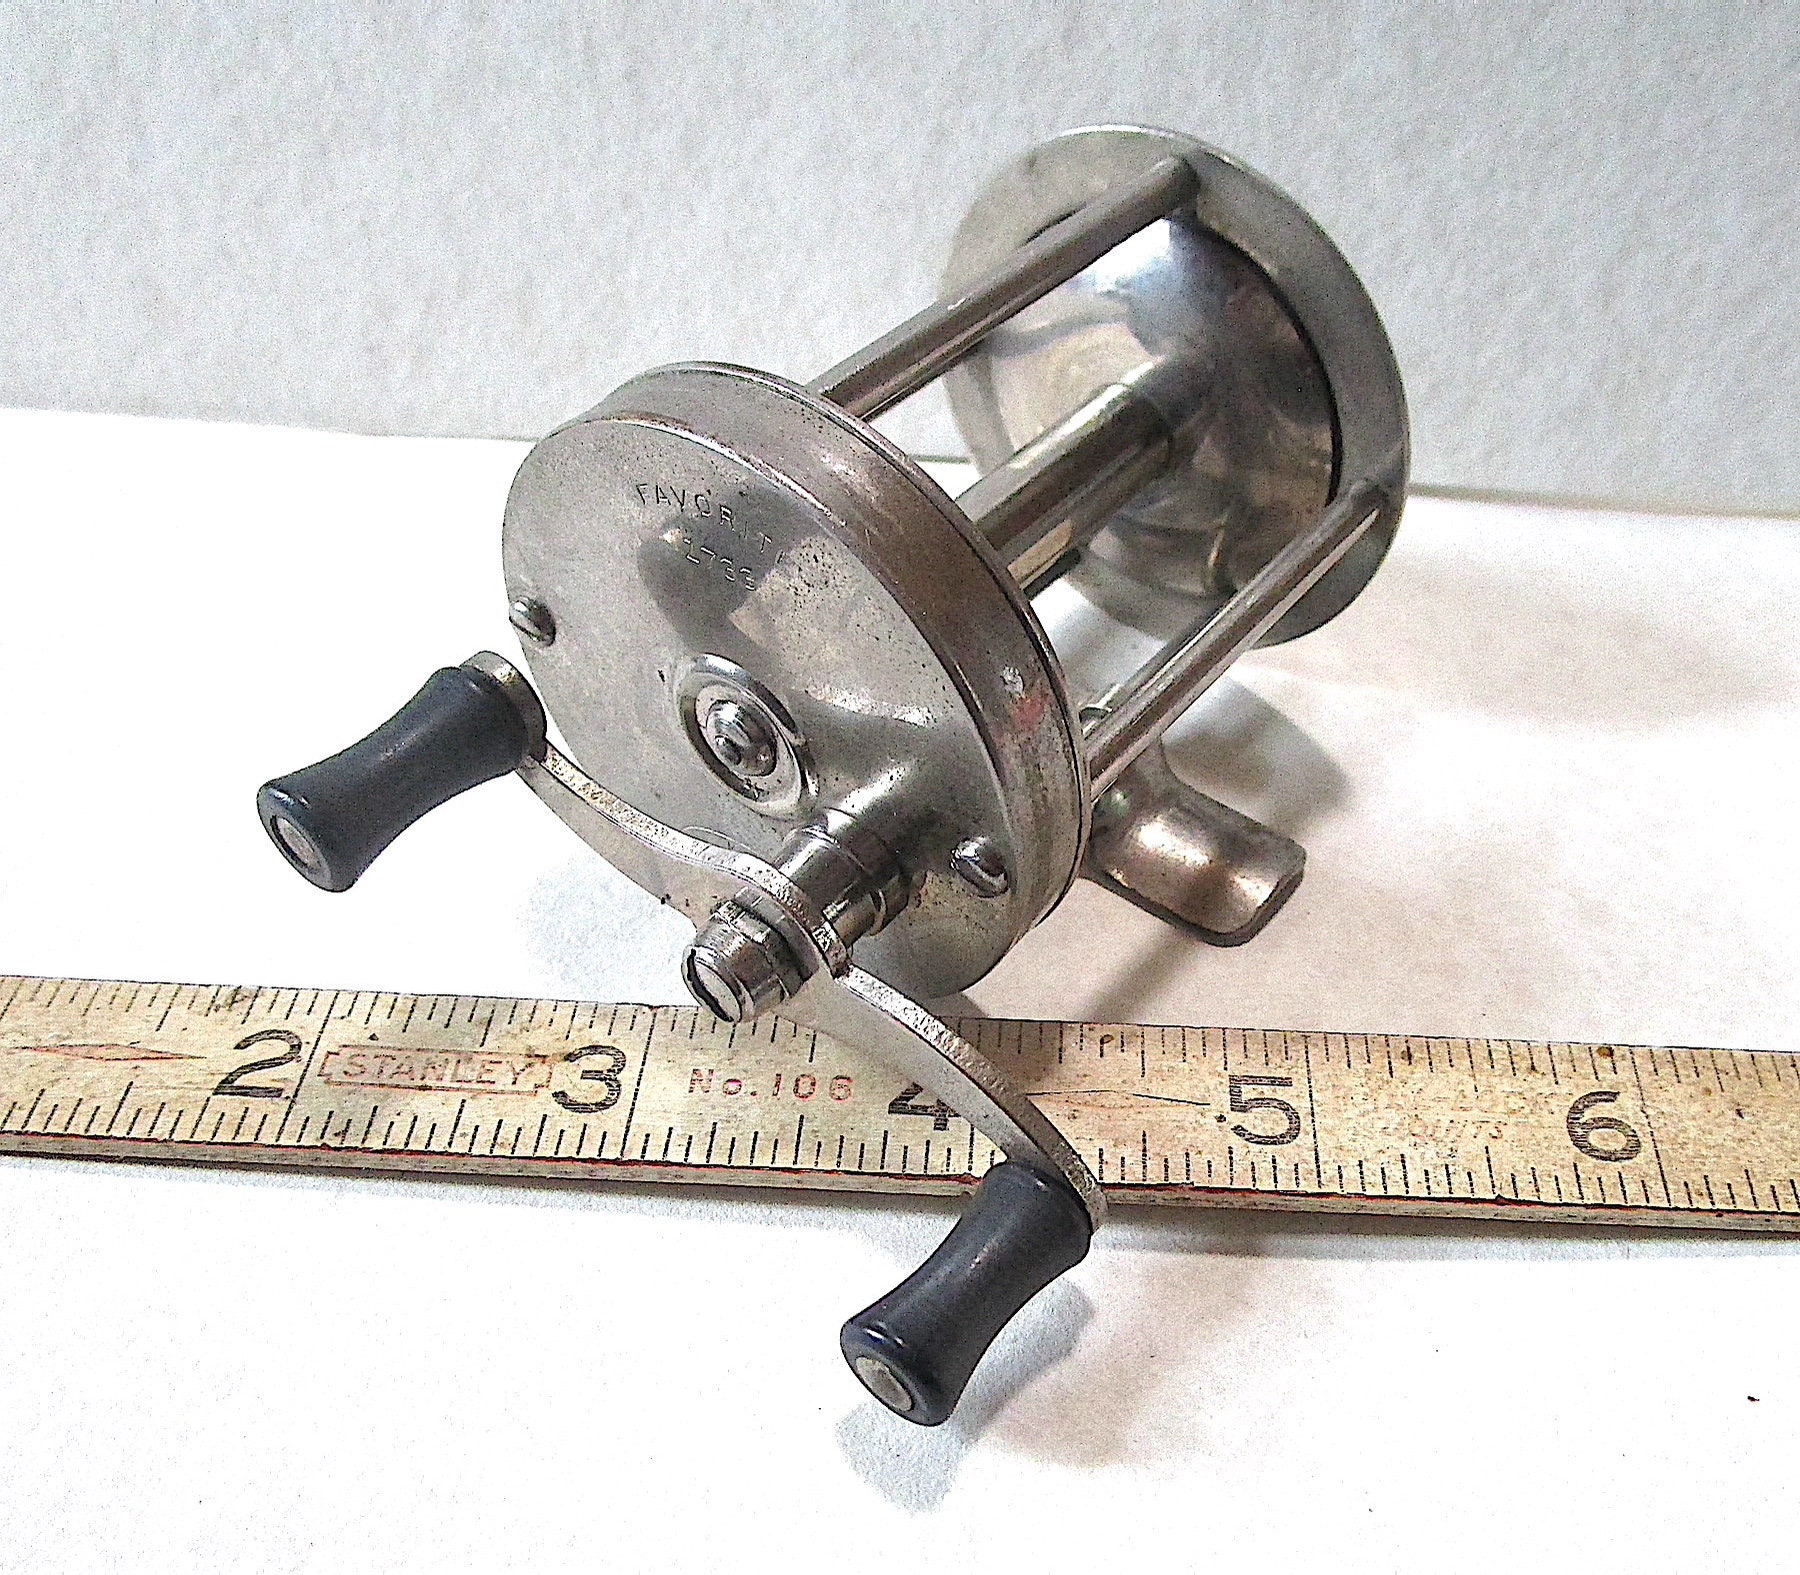 Vintage Olympic No 310 Spin Casting Reel W/ Original Box & Papers Made in  Japan